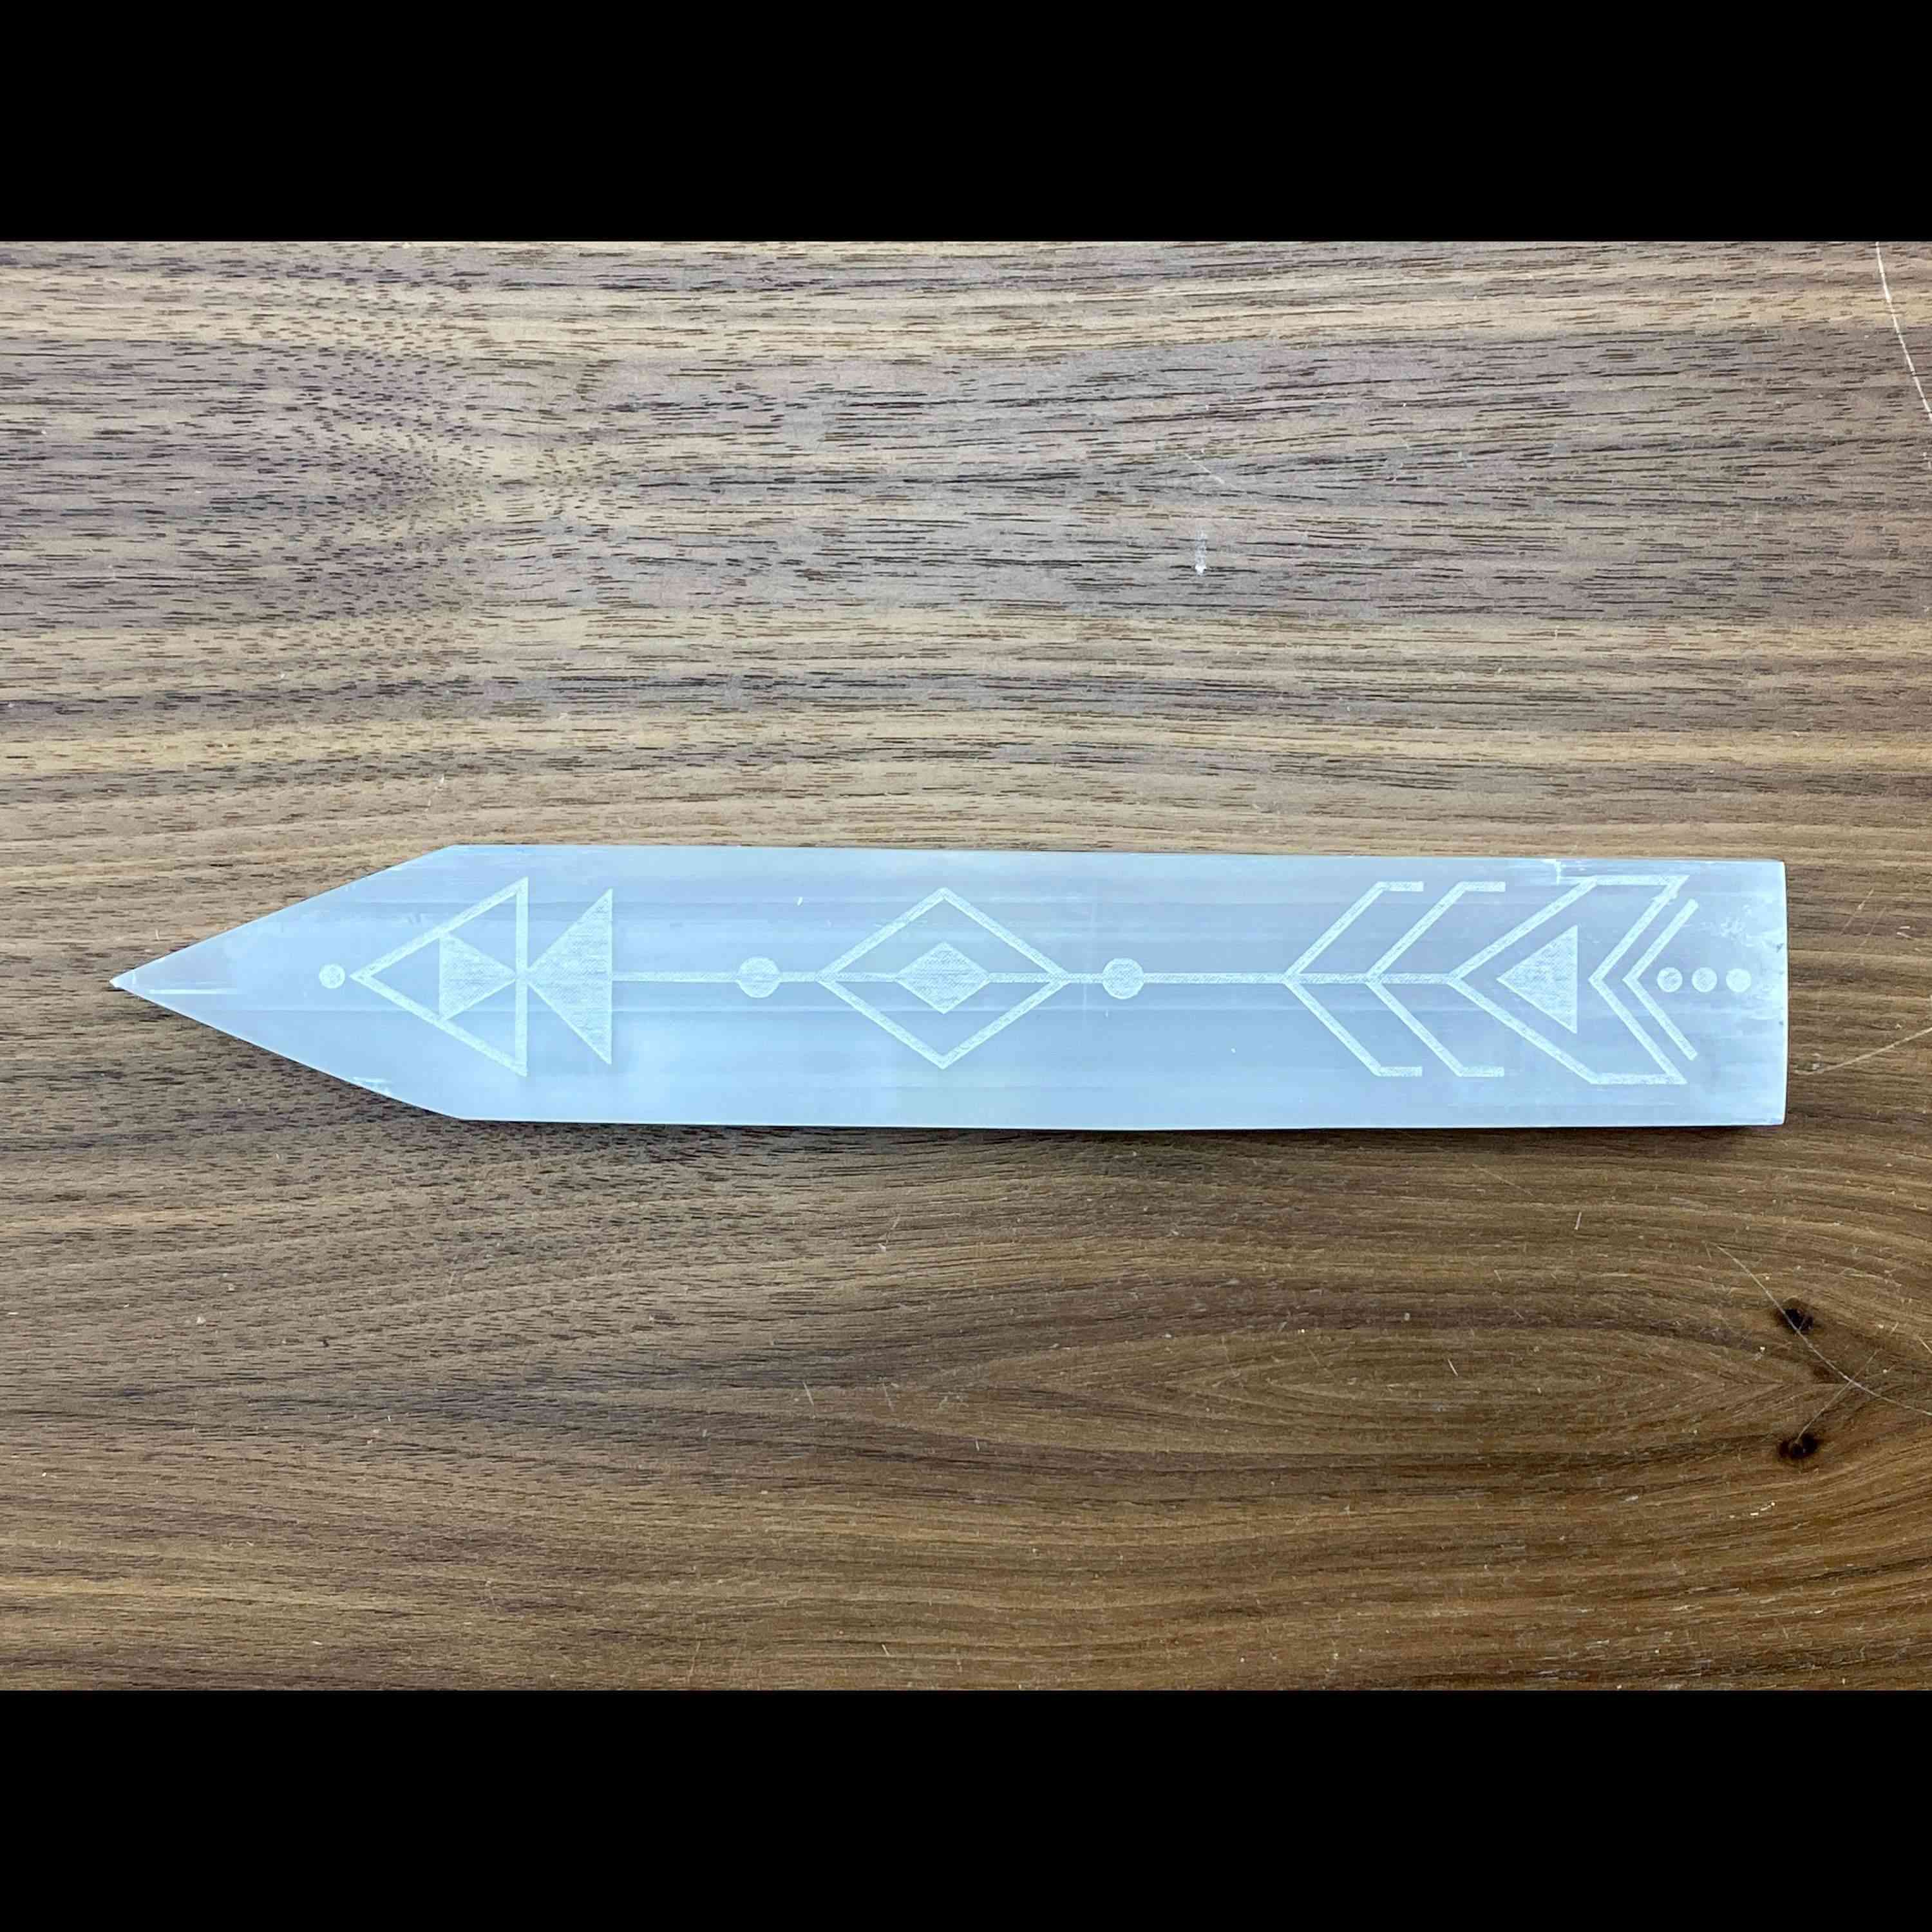 Terminated Selenite Plate Engraved With An Arrow